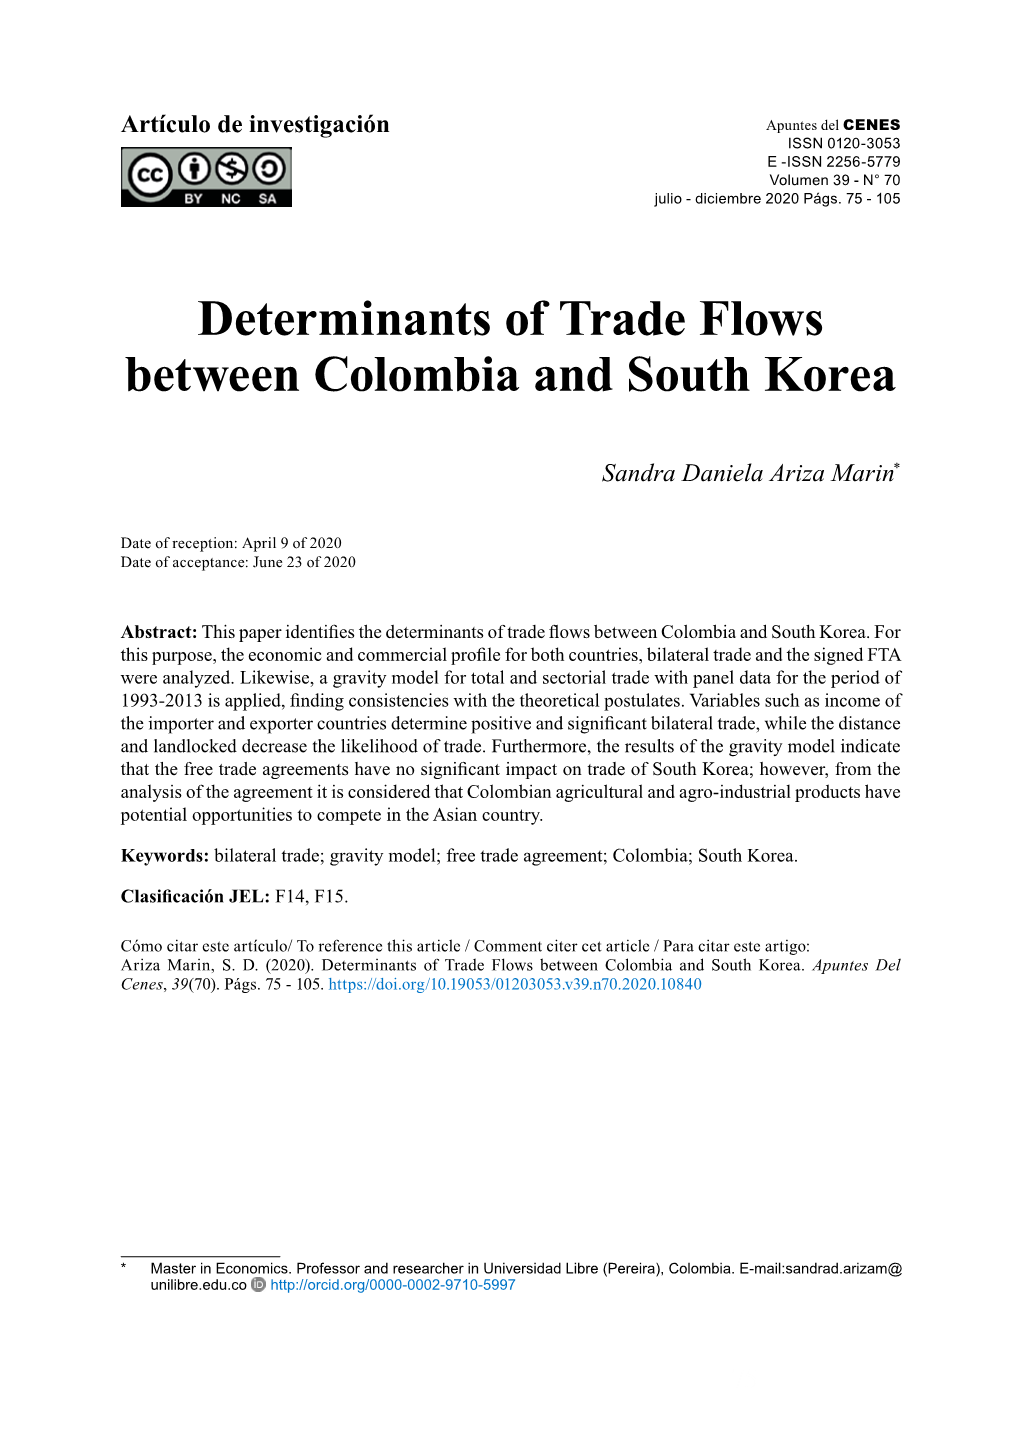 Determinants of Trade Flows Between Colombia and South Korea